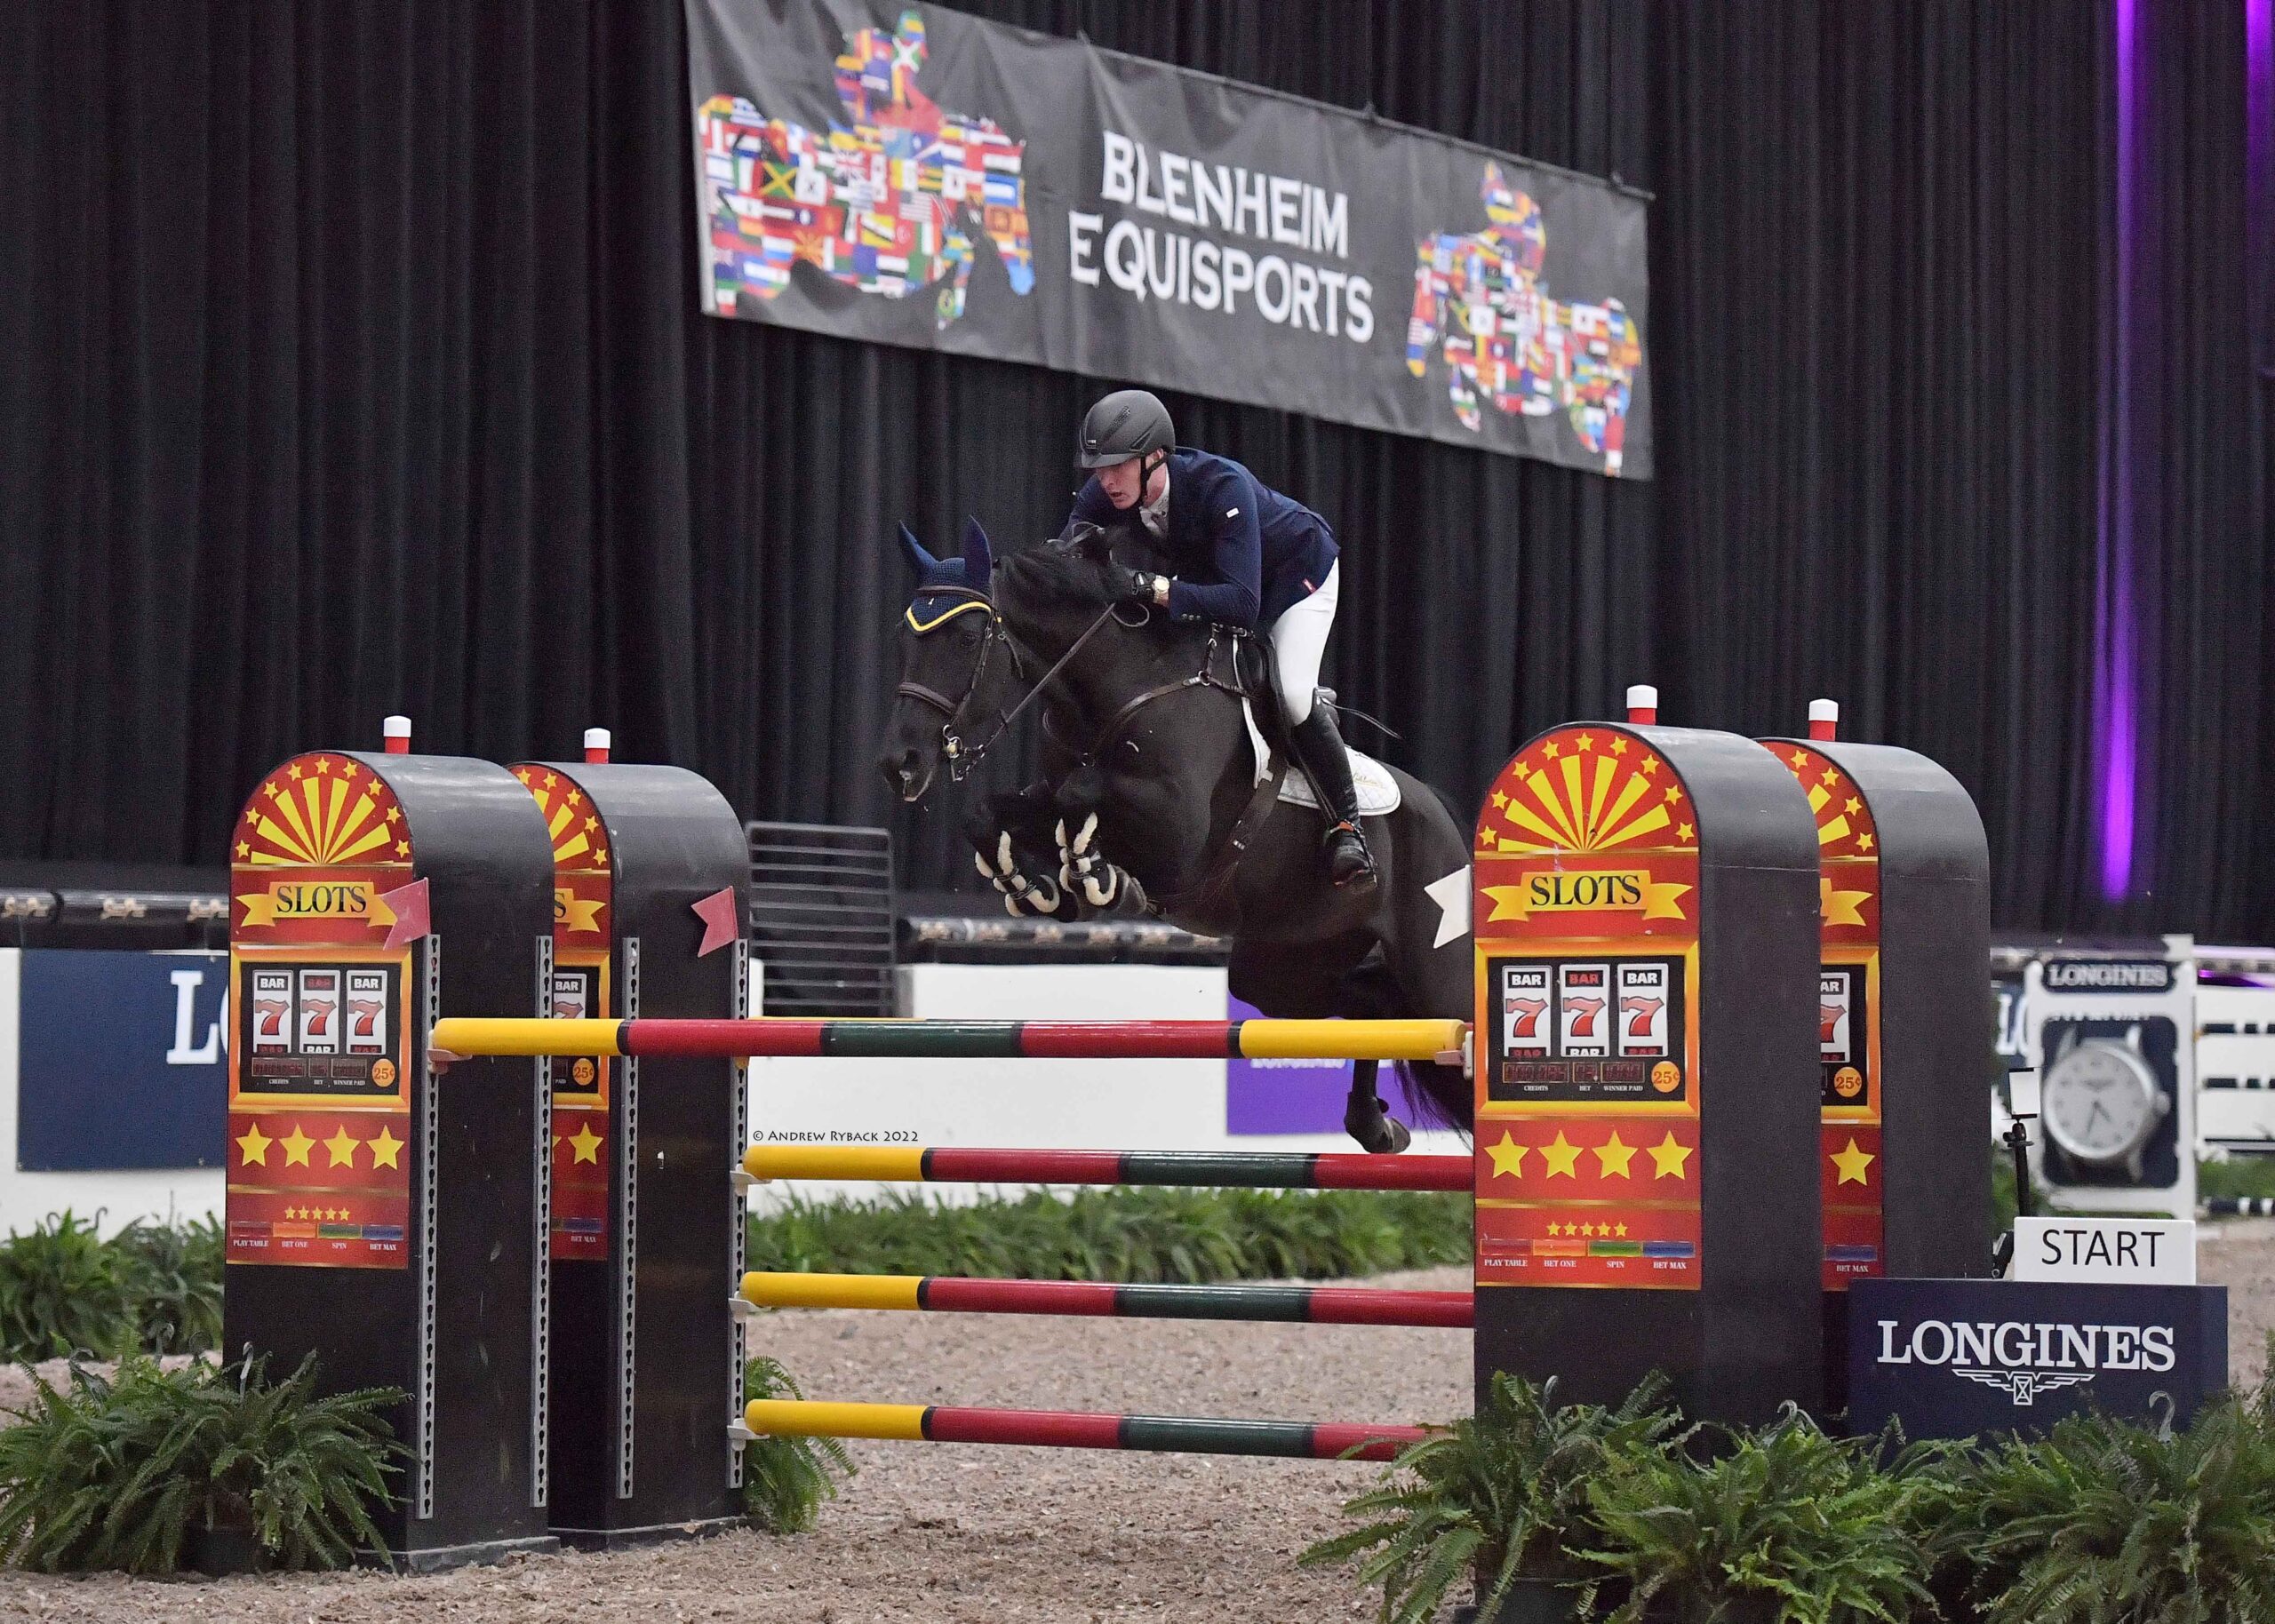 Daniel Coyle Dashes to Victory in the $25,000 CSI4*-W Las Vegas National “Lucky Sevens” Two-Phase Stake